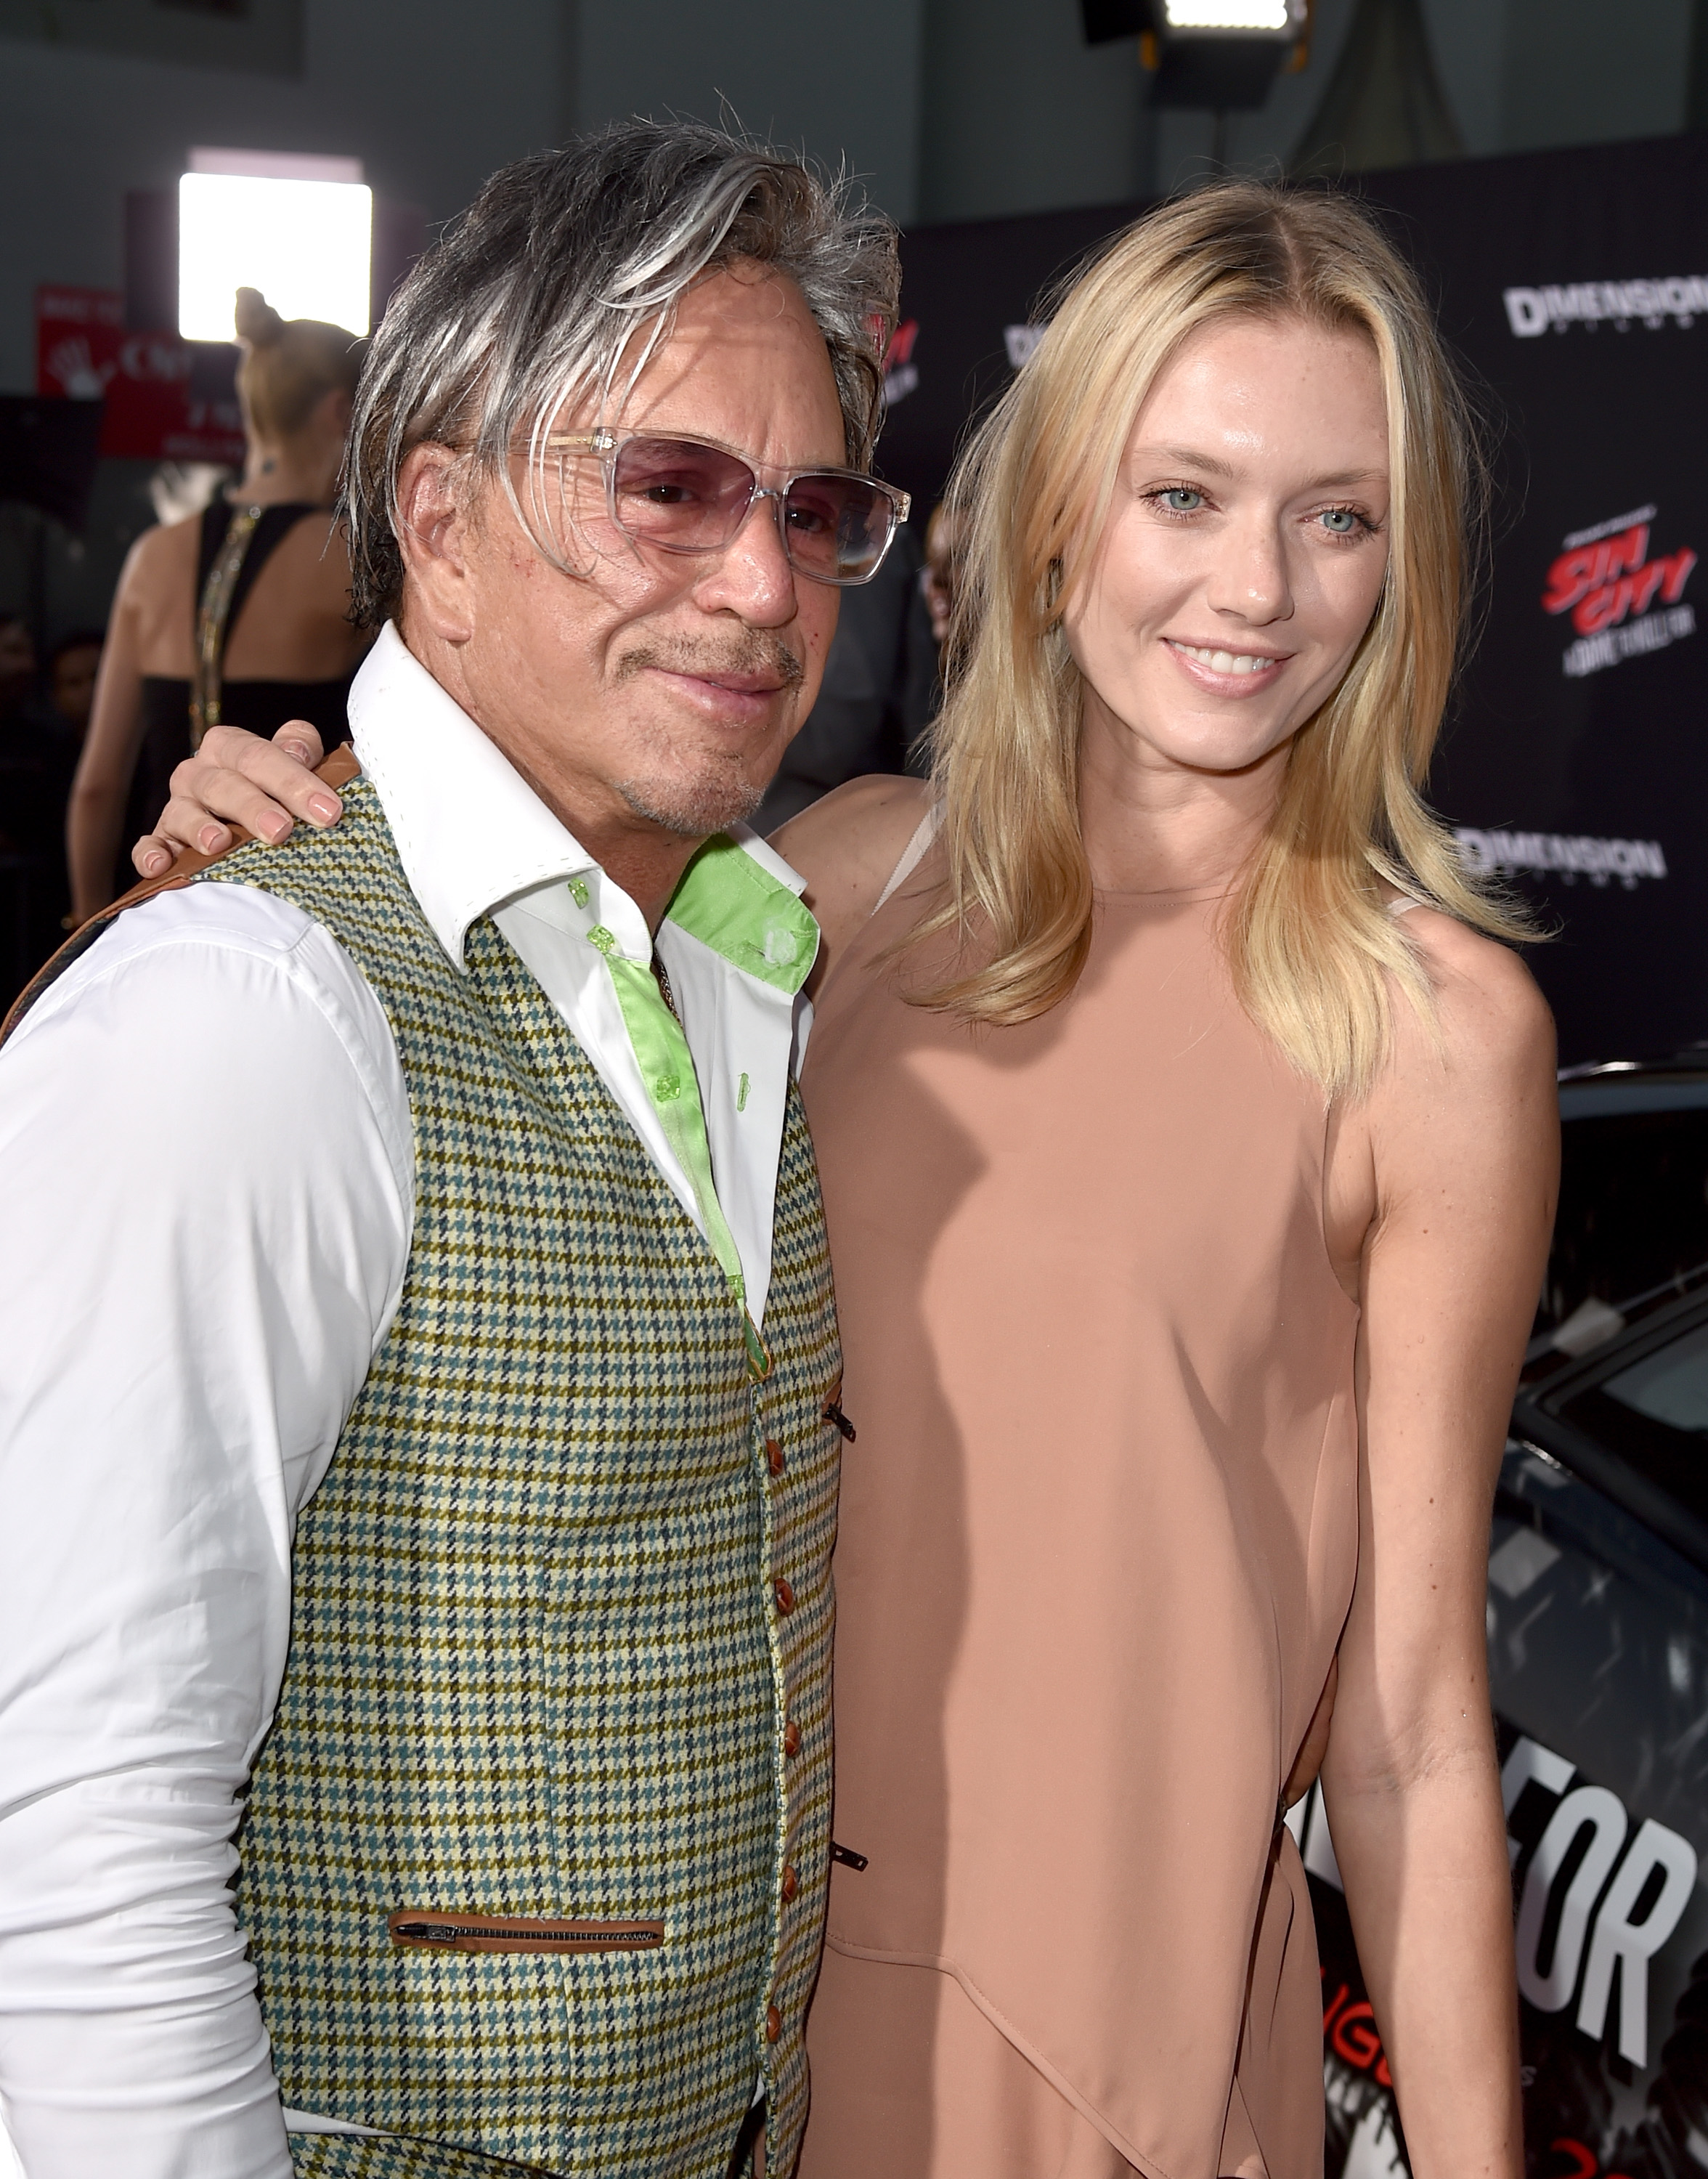 Mickey Rourke and model Anastassija Makarenko at the premiere of "Sin City: A Dame To Kill For," 2014 | Source: Getty Images